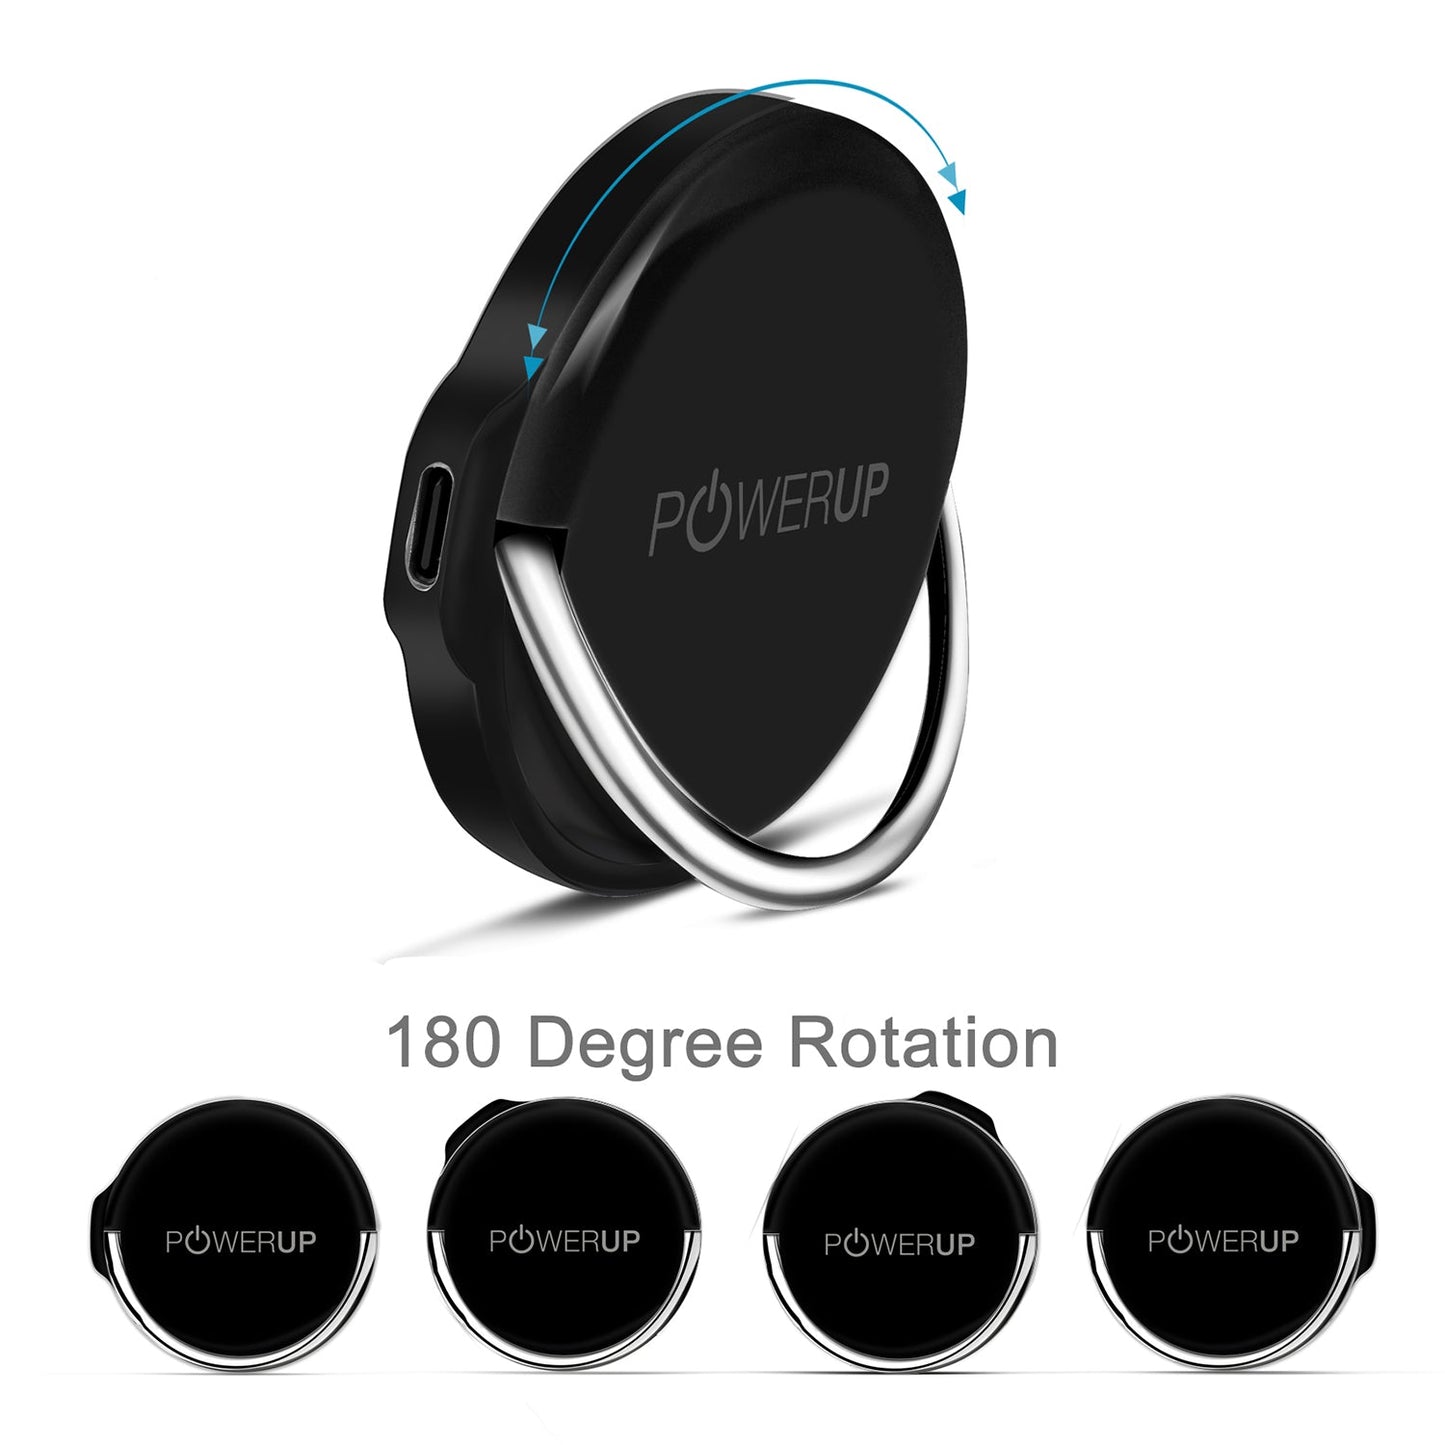 Powerup Magsafe Wireless Charger With Stand - Black